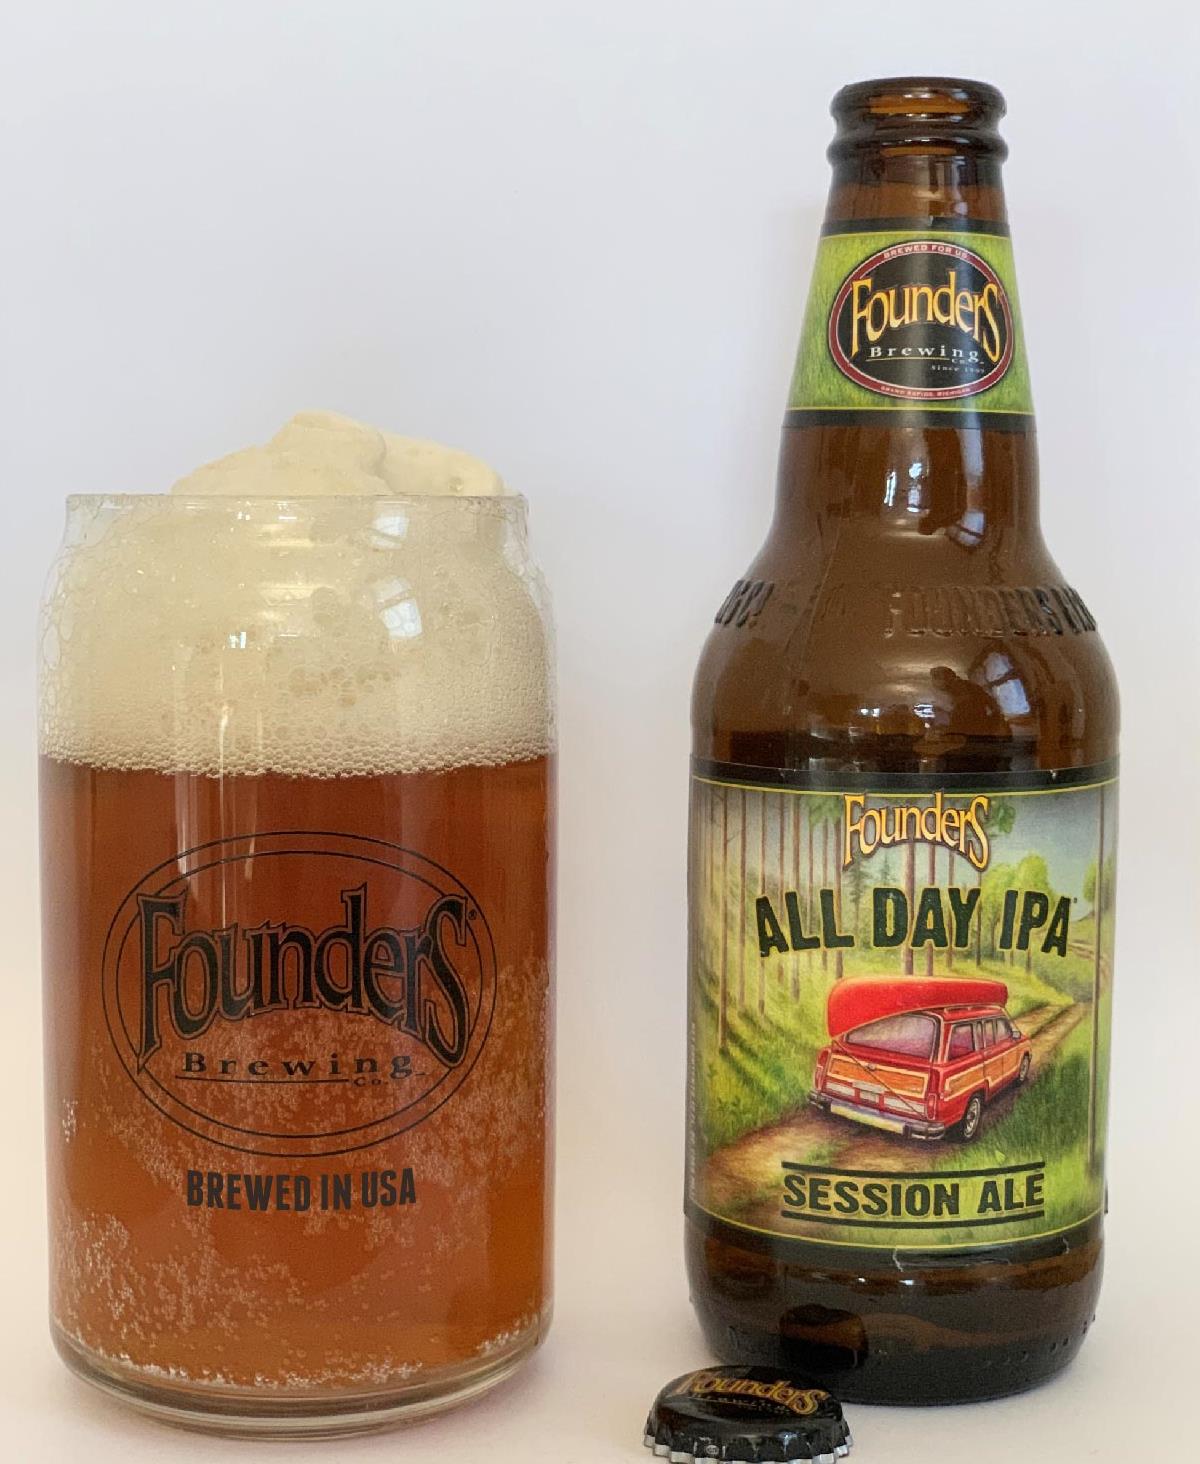 Founders Brewed in USA